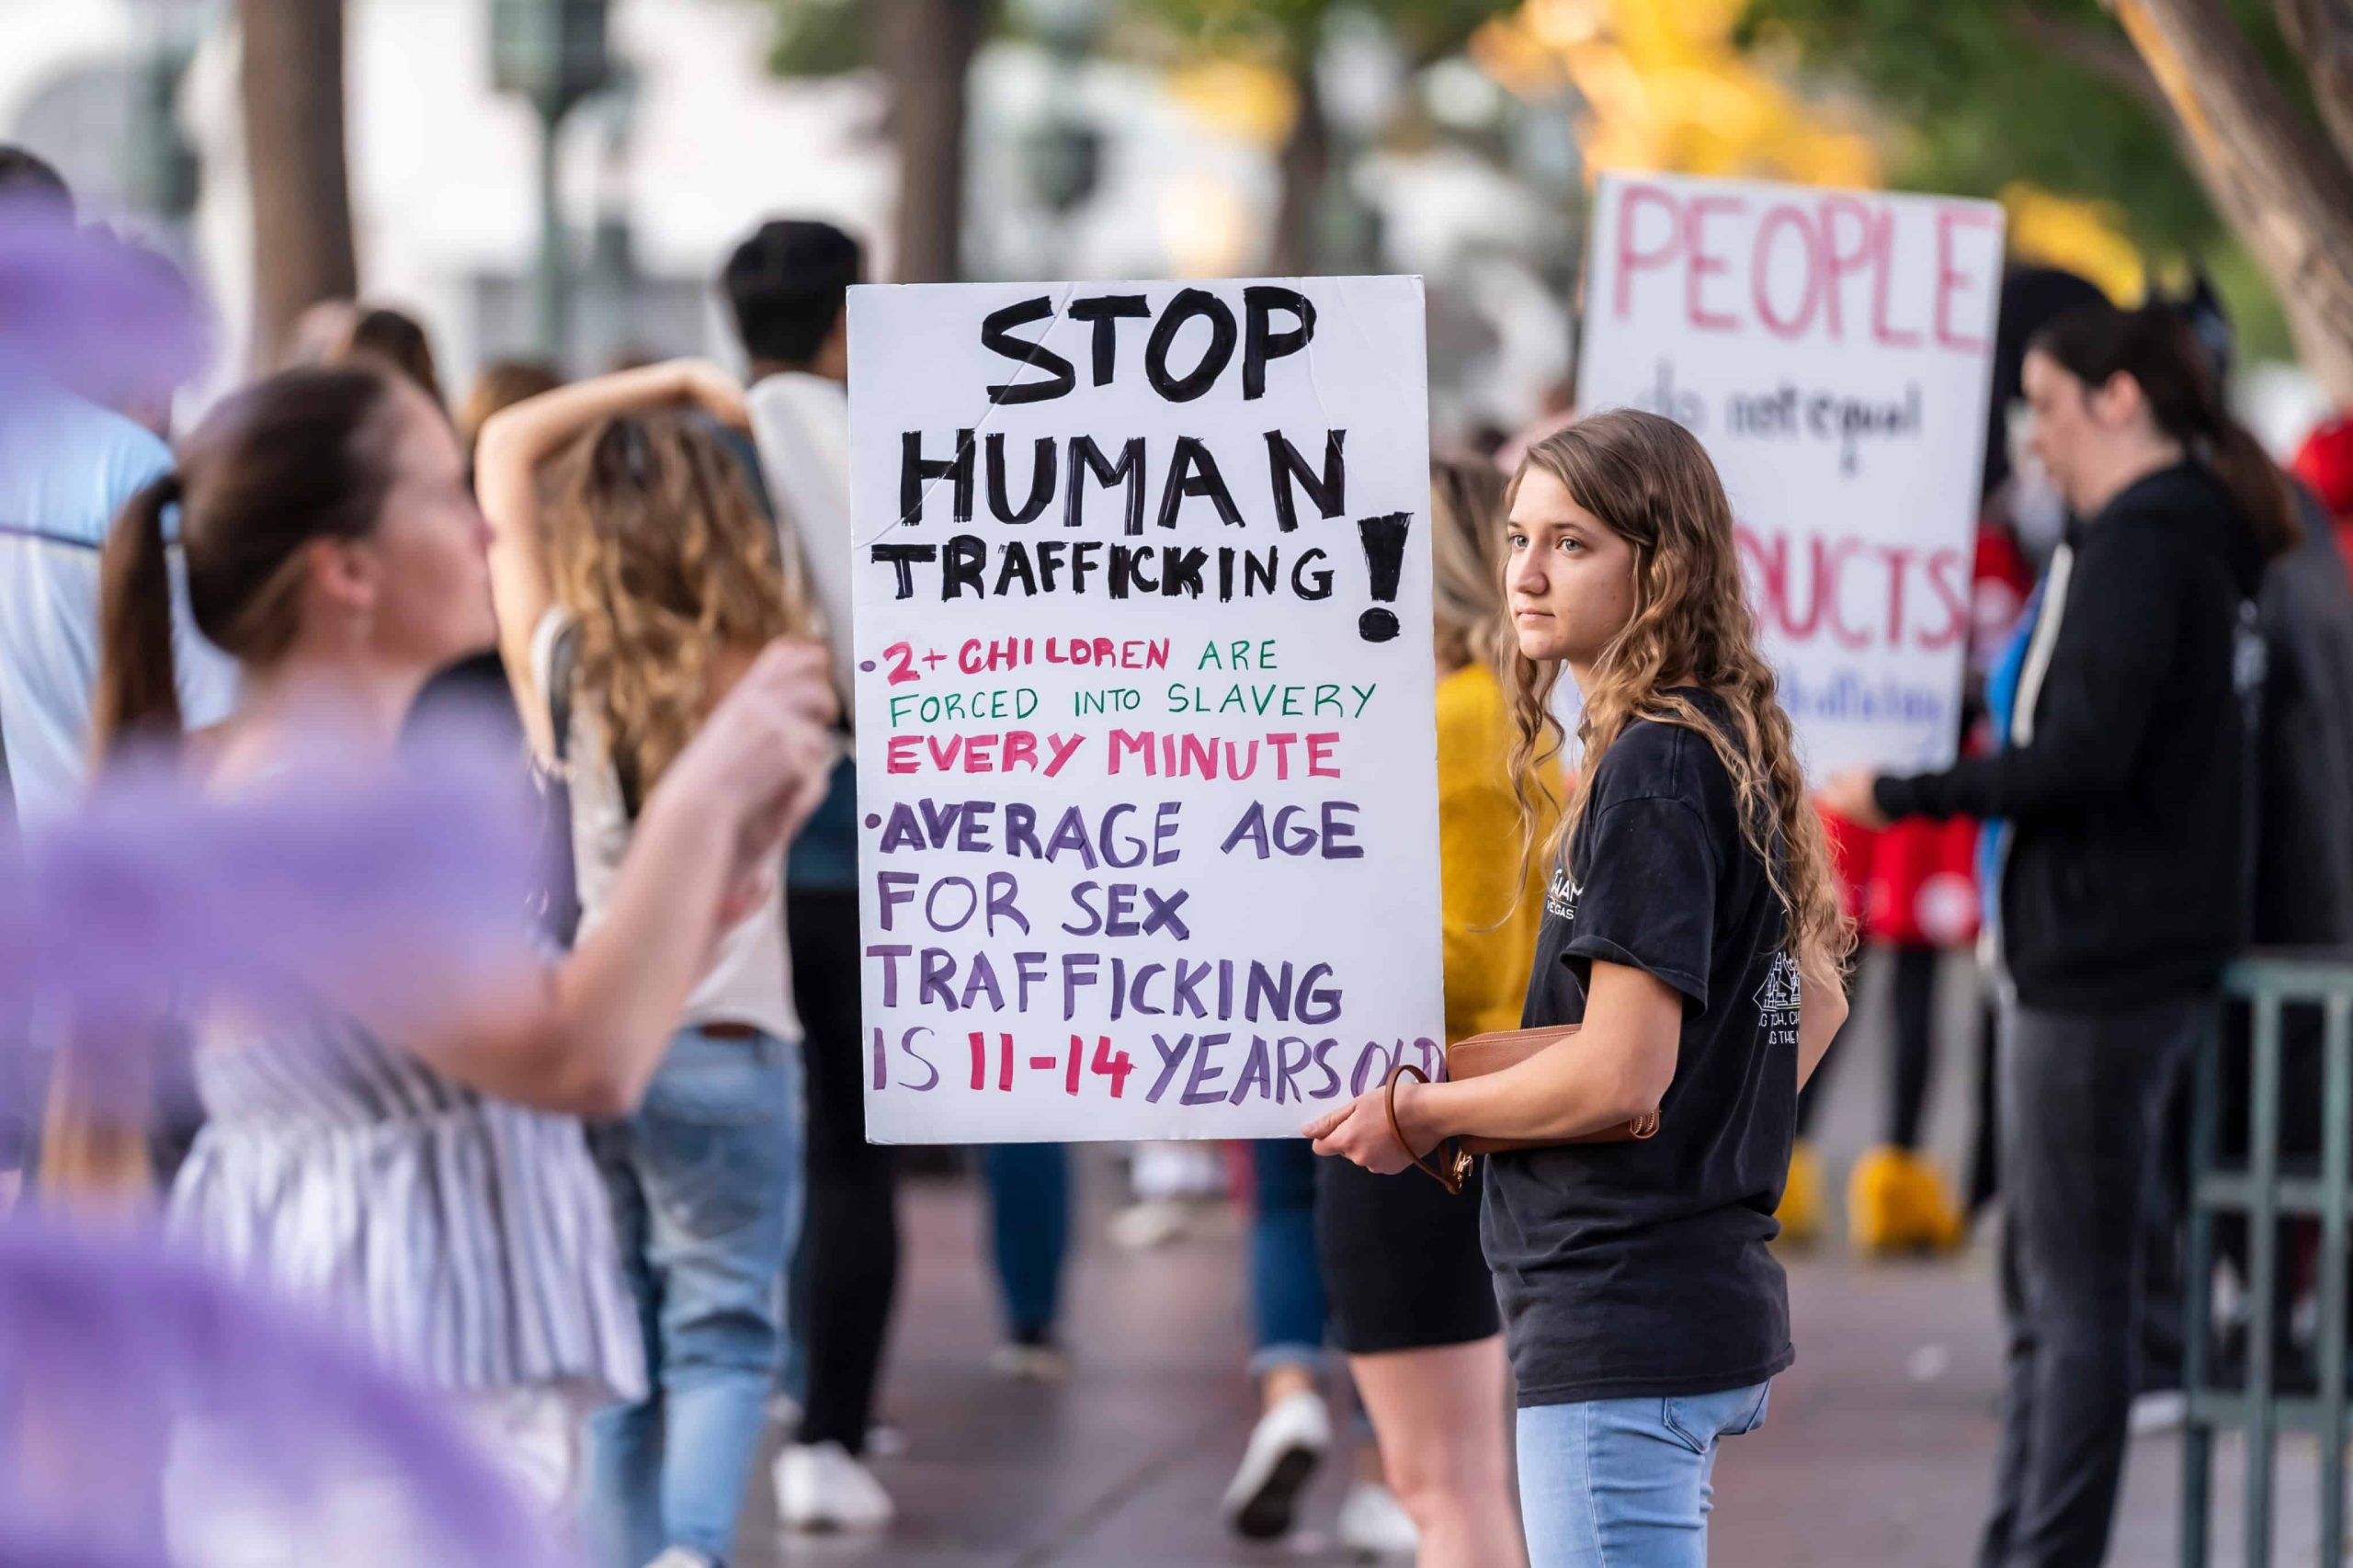 Oregon Now Requires Cannabis Employers, Employees To Report Suspected Human Trafficking